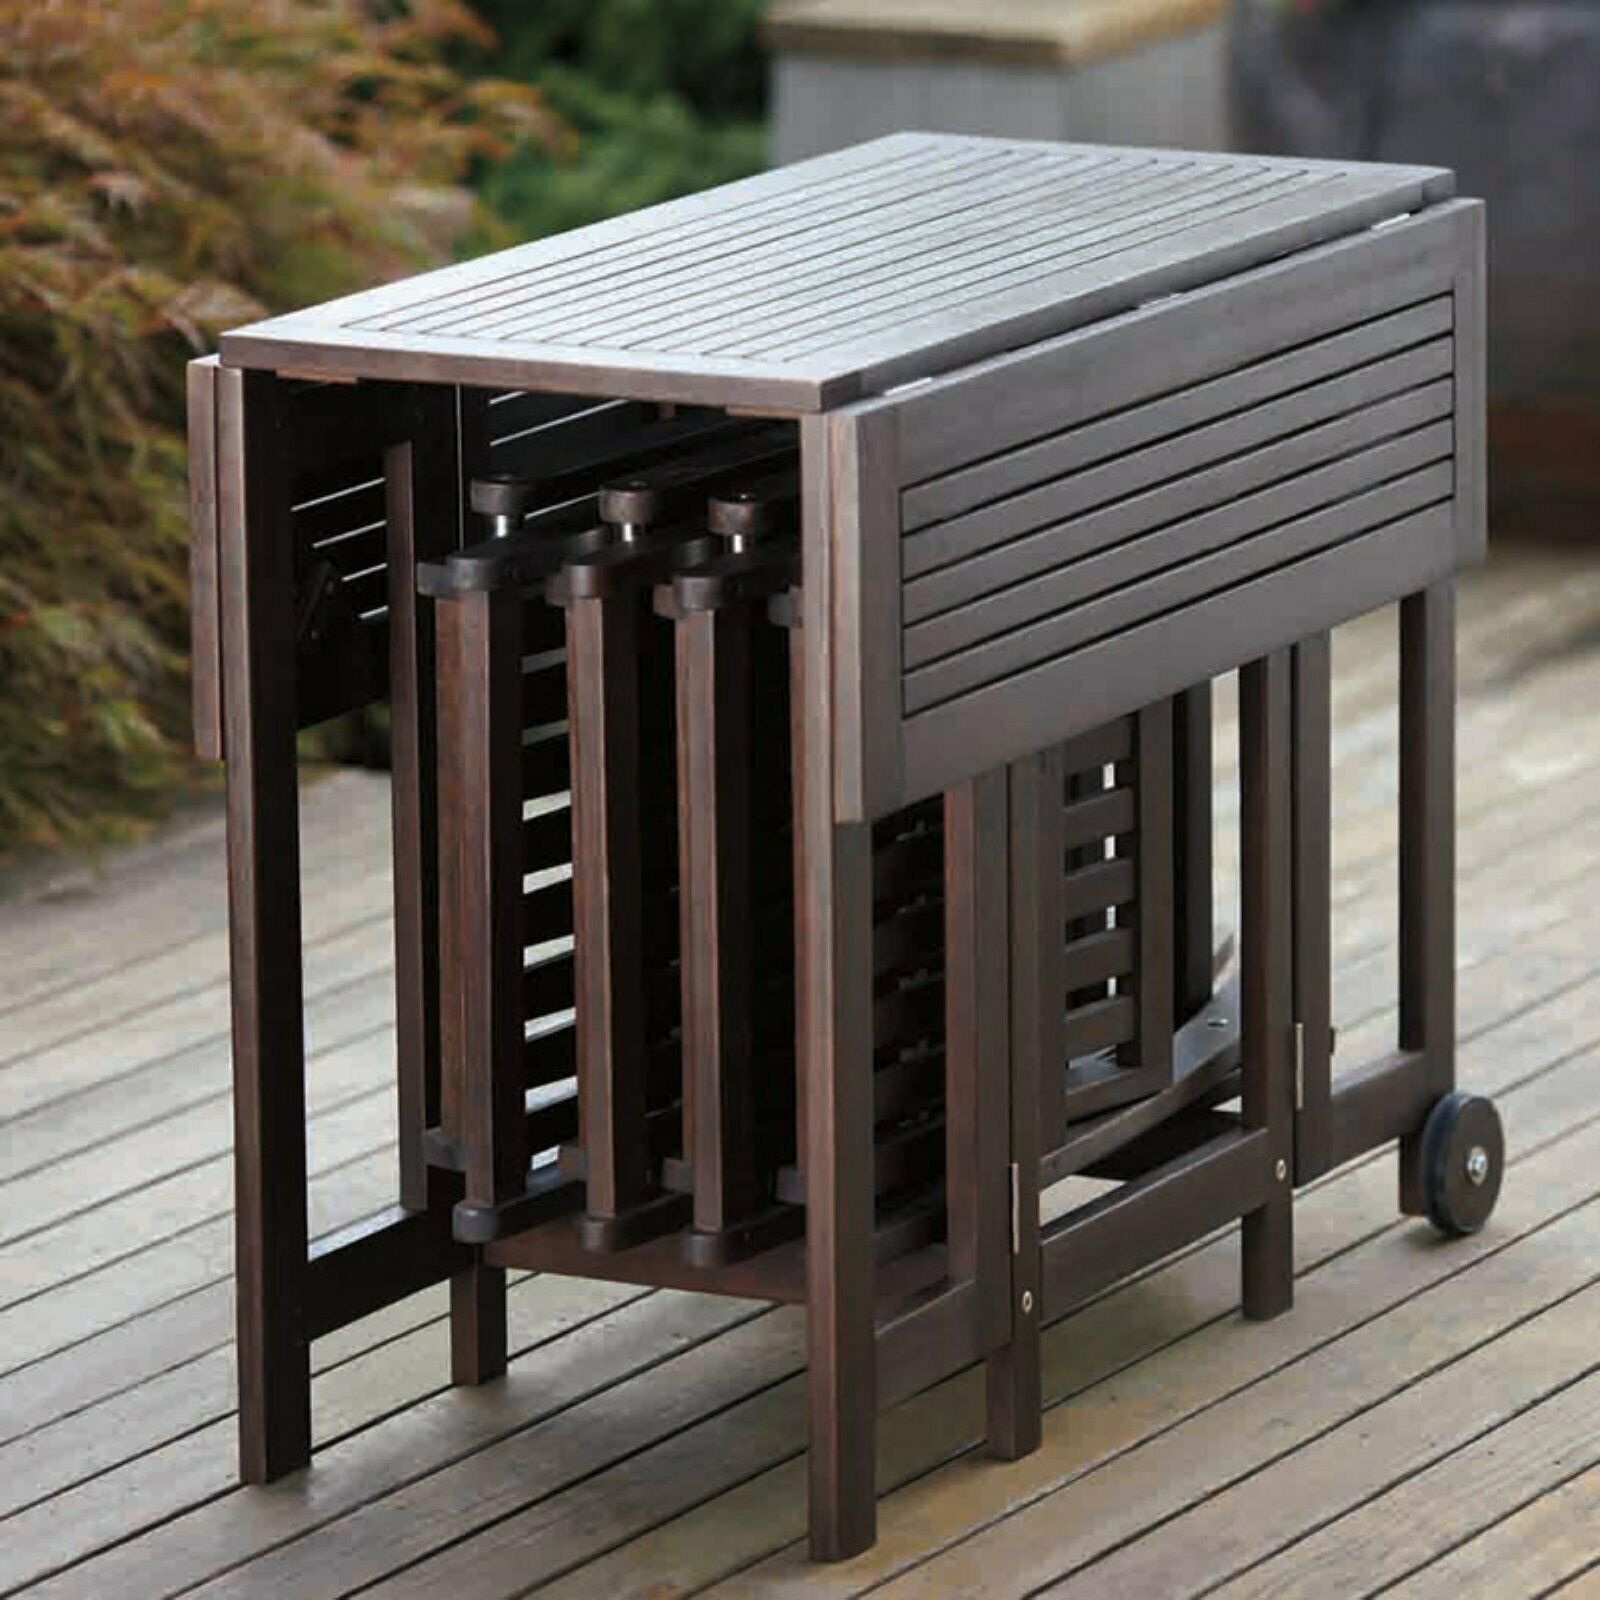 Portable Dining Set with 4 Folding Chairs Brown Durable Space Saver